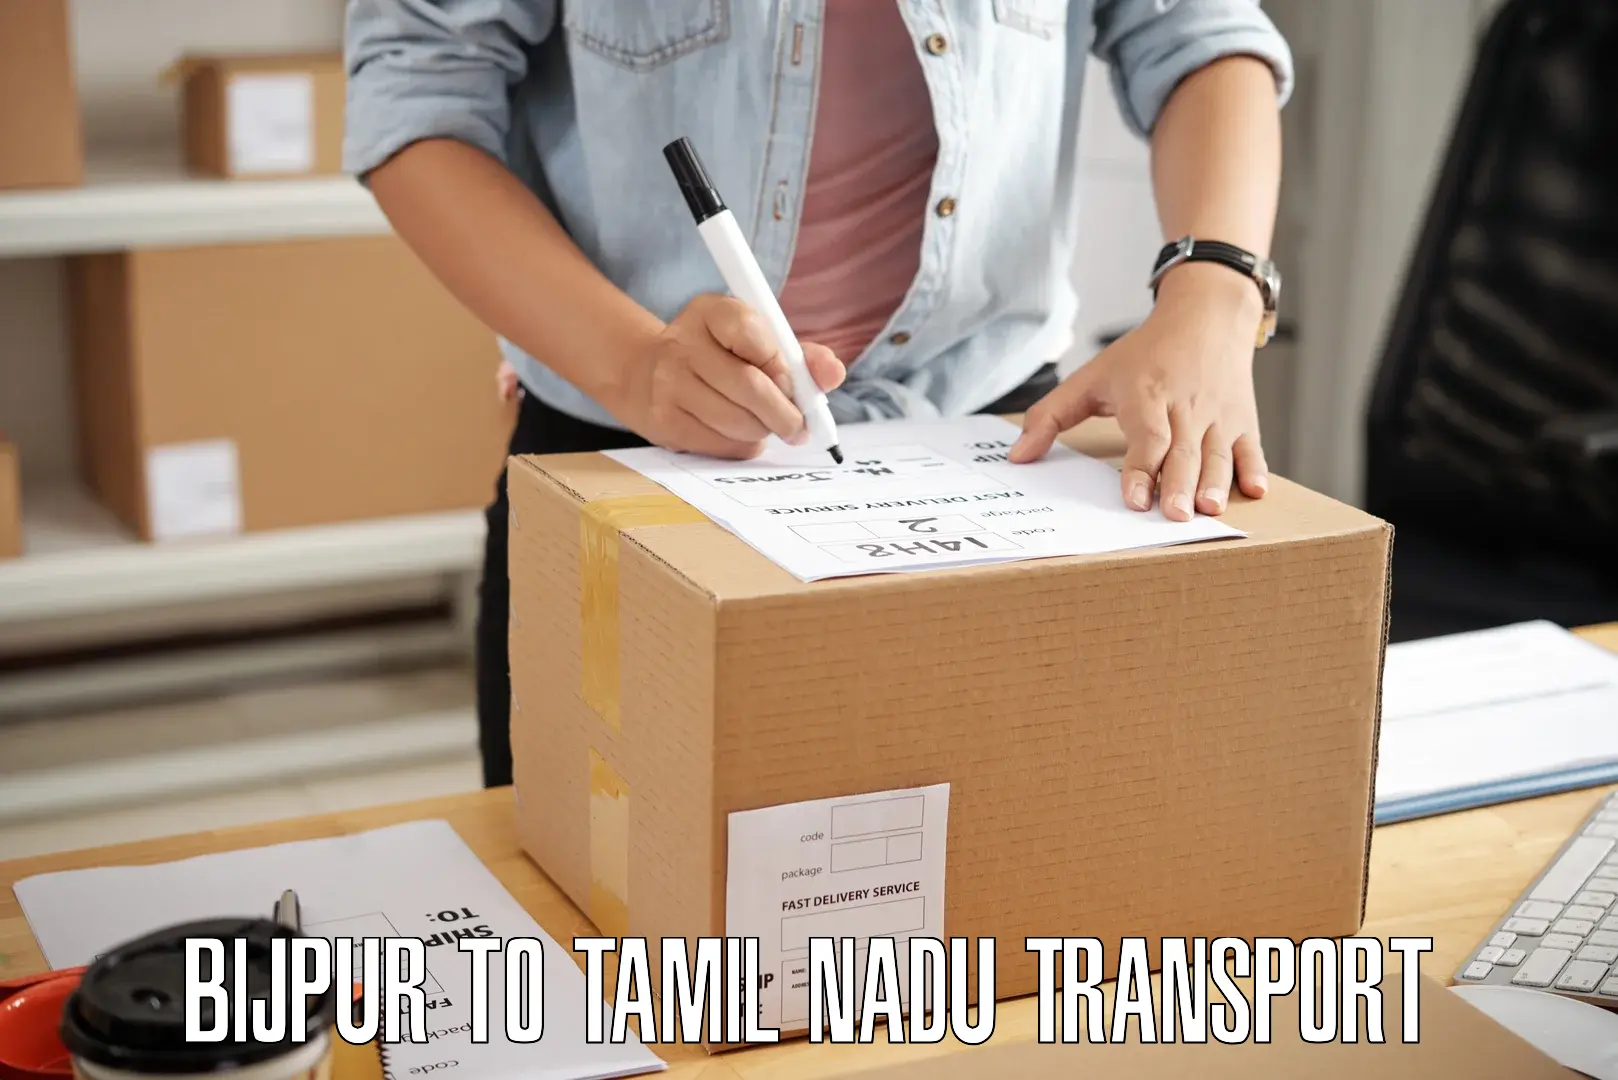 Parcel transport services Bijpur to Vellore Institute of Technology